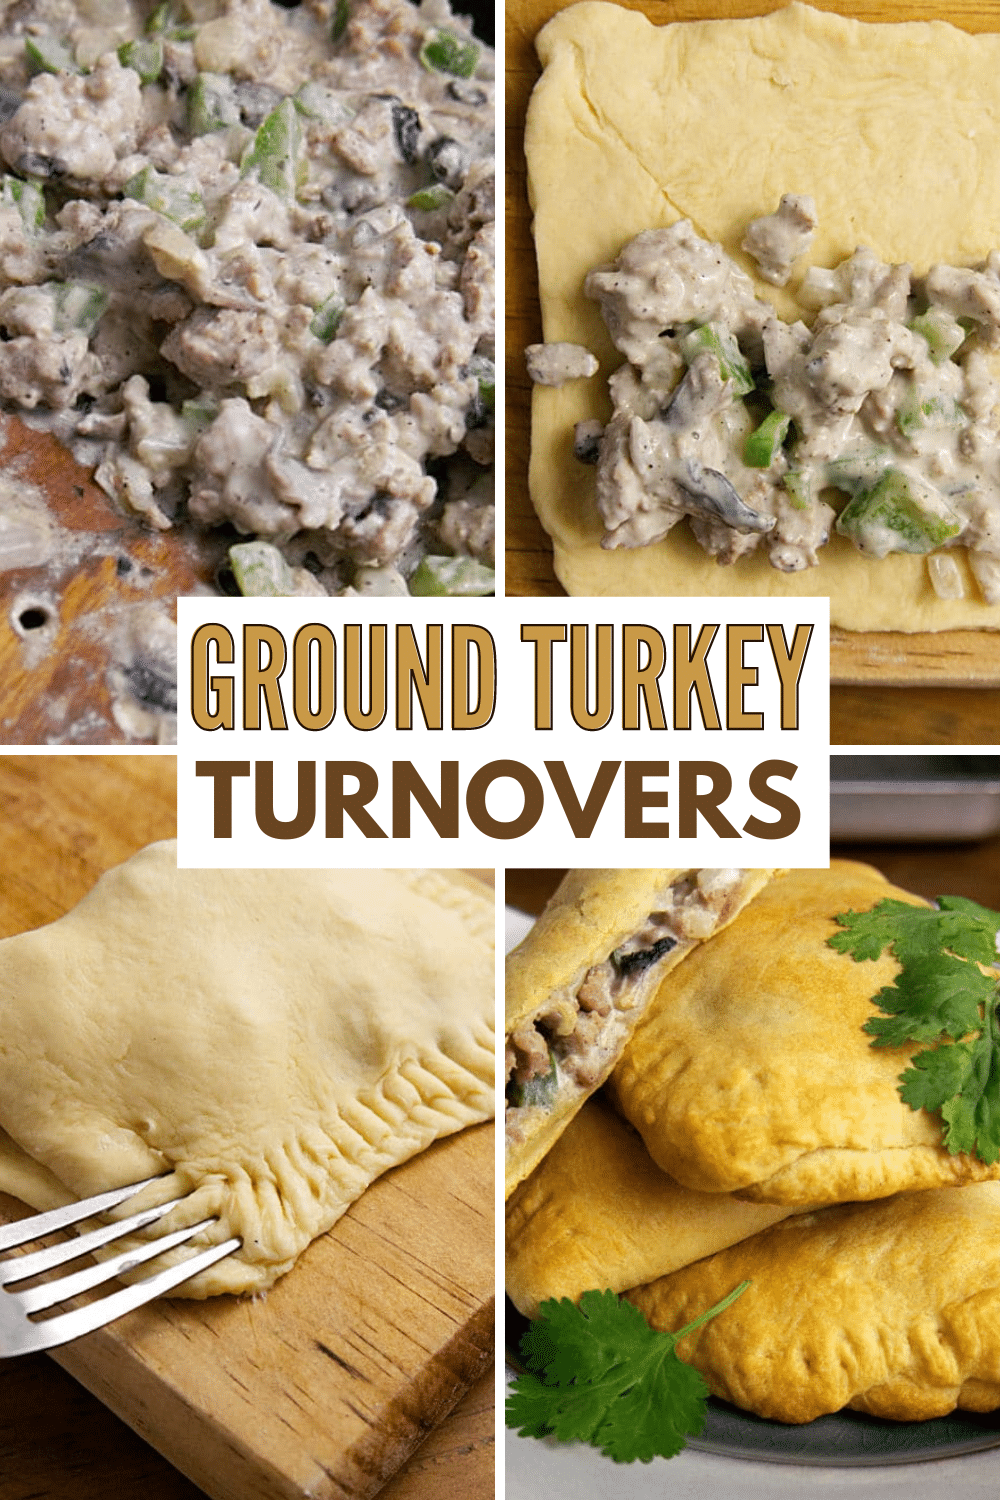 Ground turkey turnovers are a delightful twist on traditional pastries filled with flavorful ground turkey.